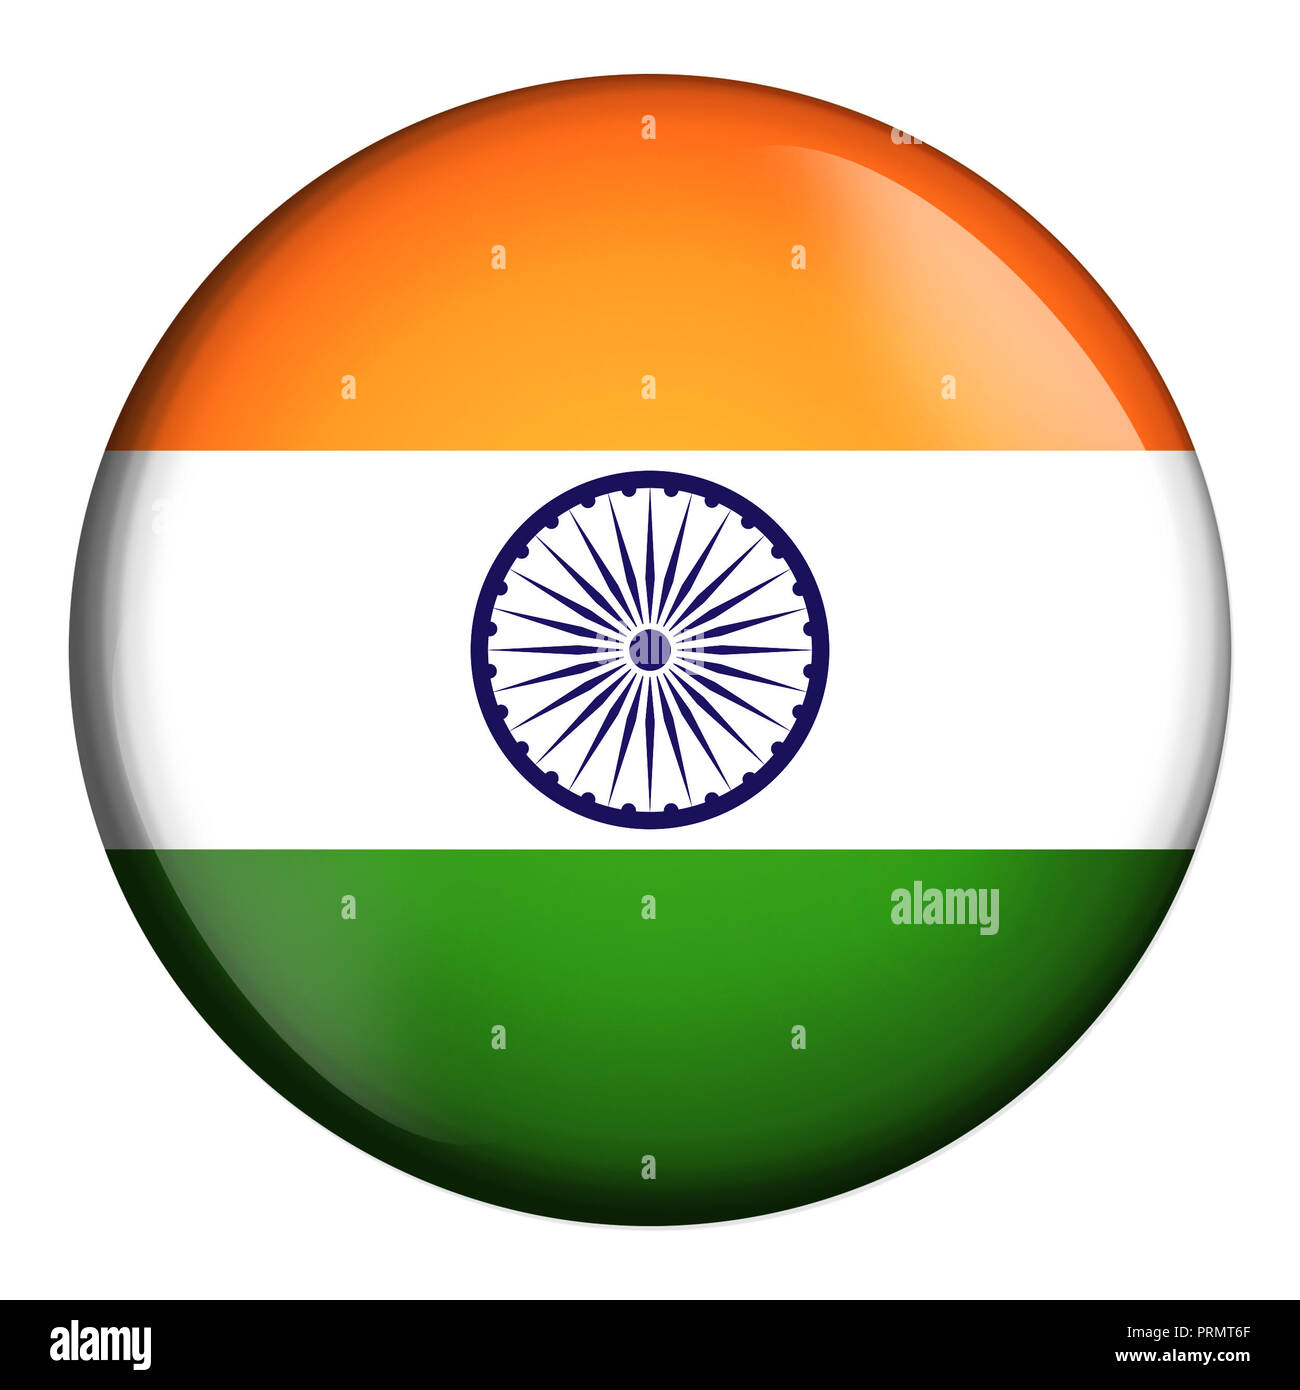 India flag circle Cut Out Stock Images & Pictures - Alamy